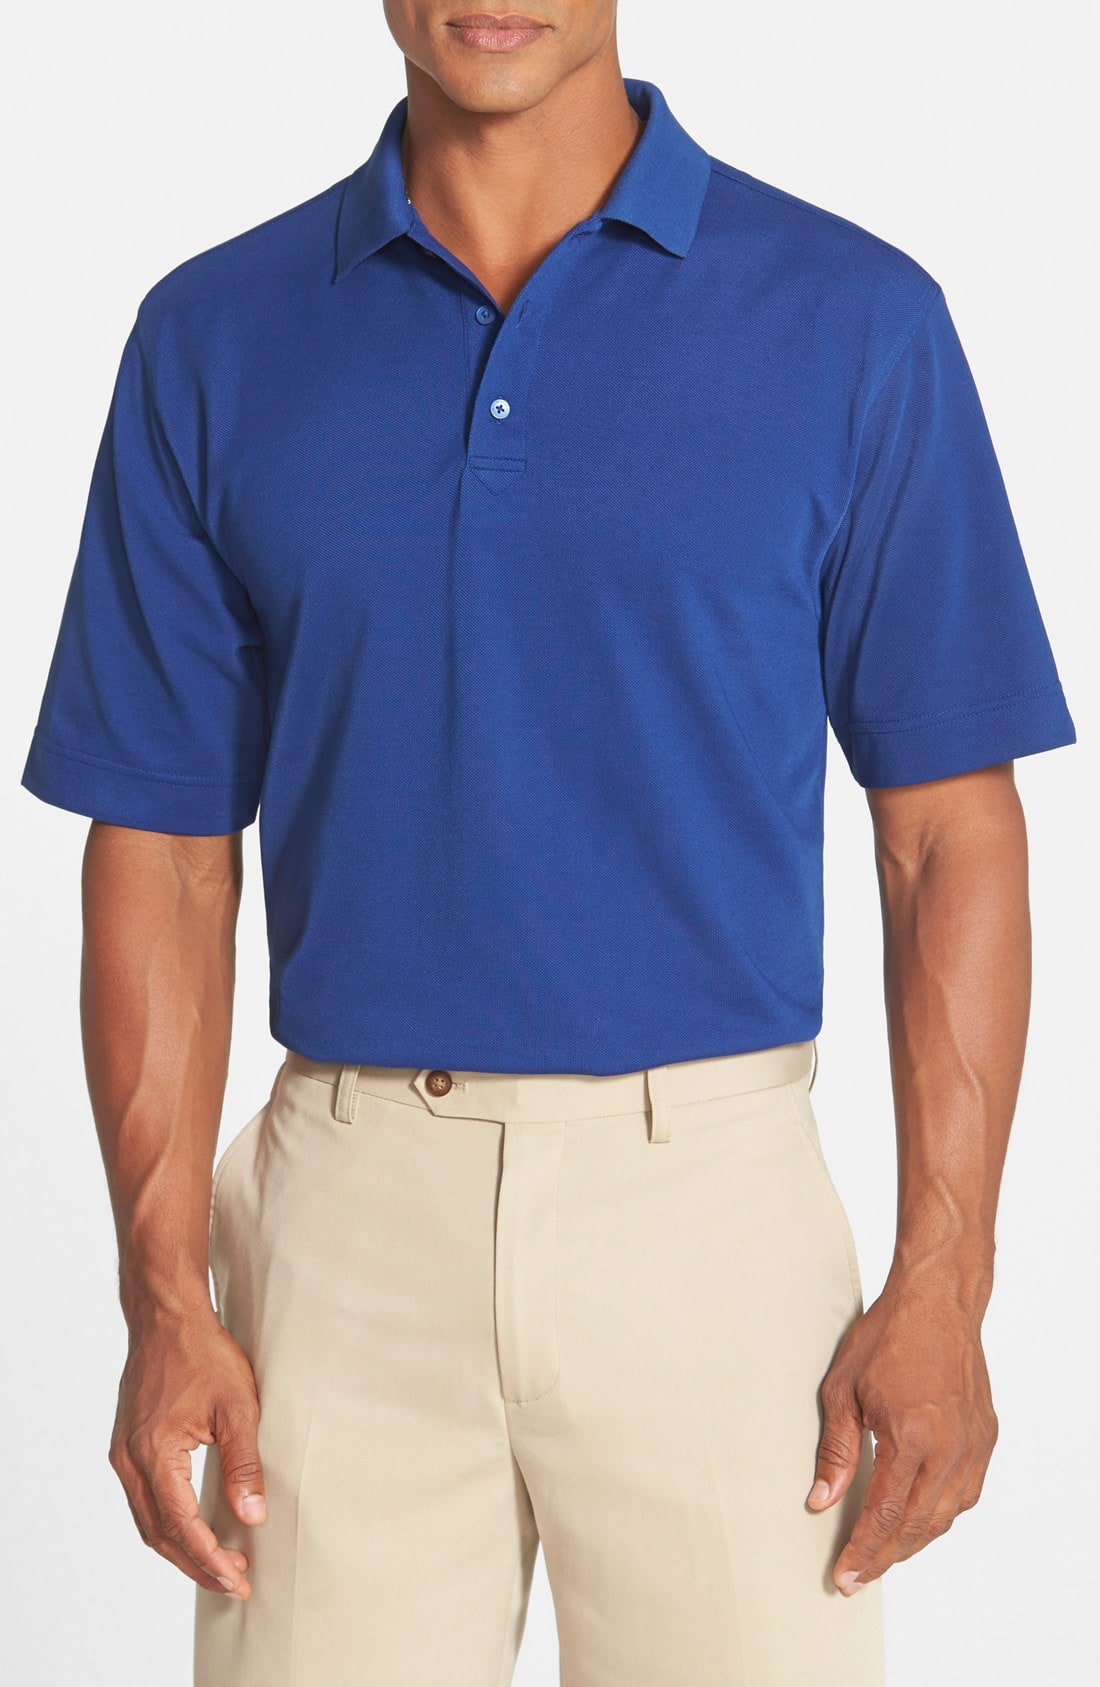 Cutter & Buck 'Championship' Classic Fit DryTec Golf Polo (Online Only)